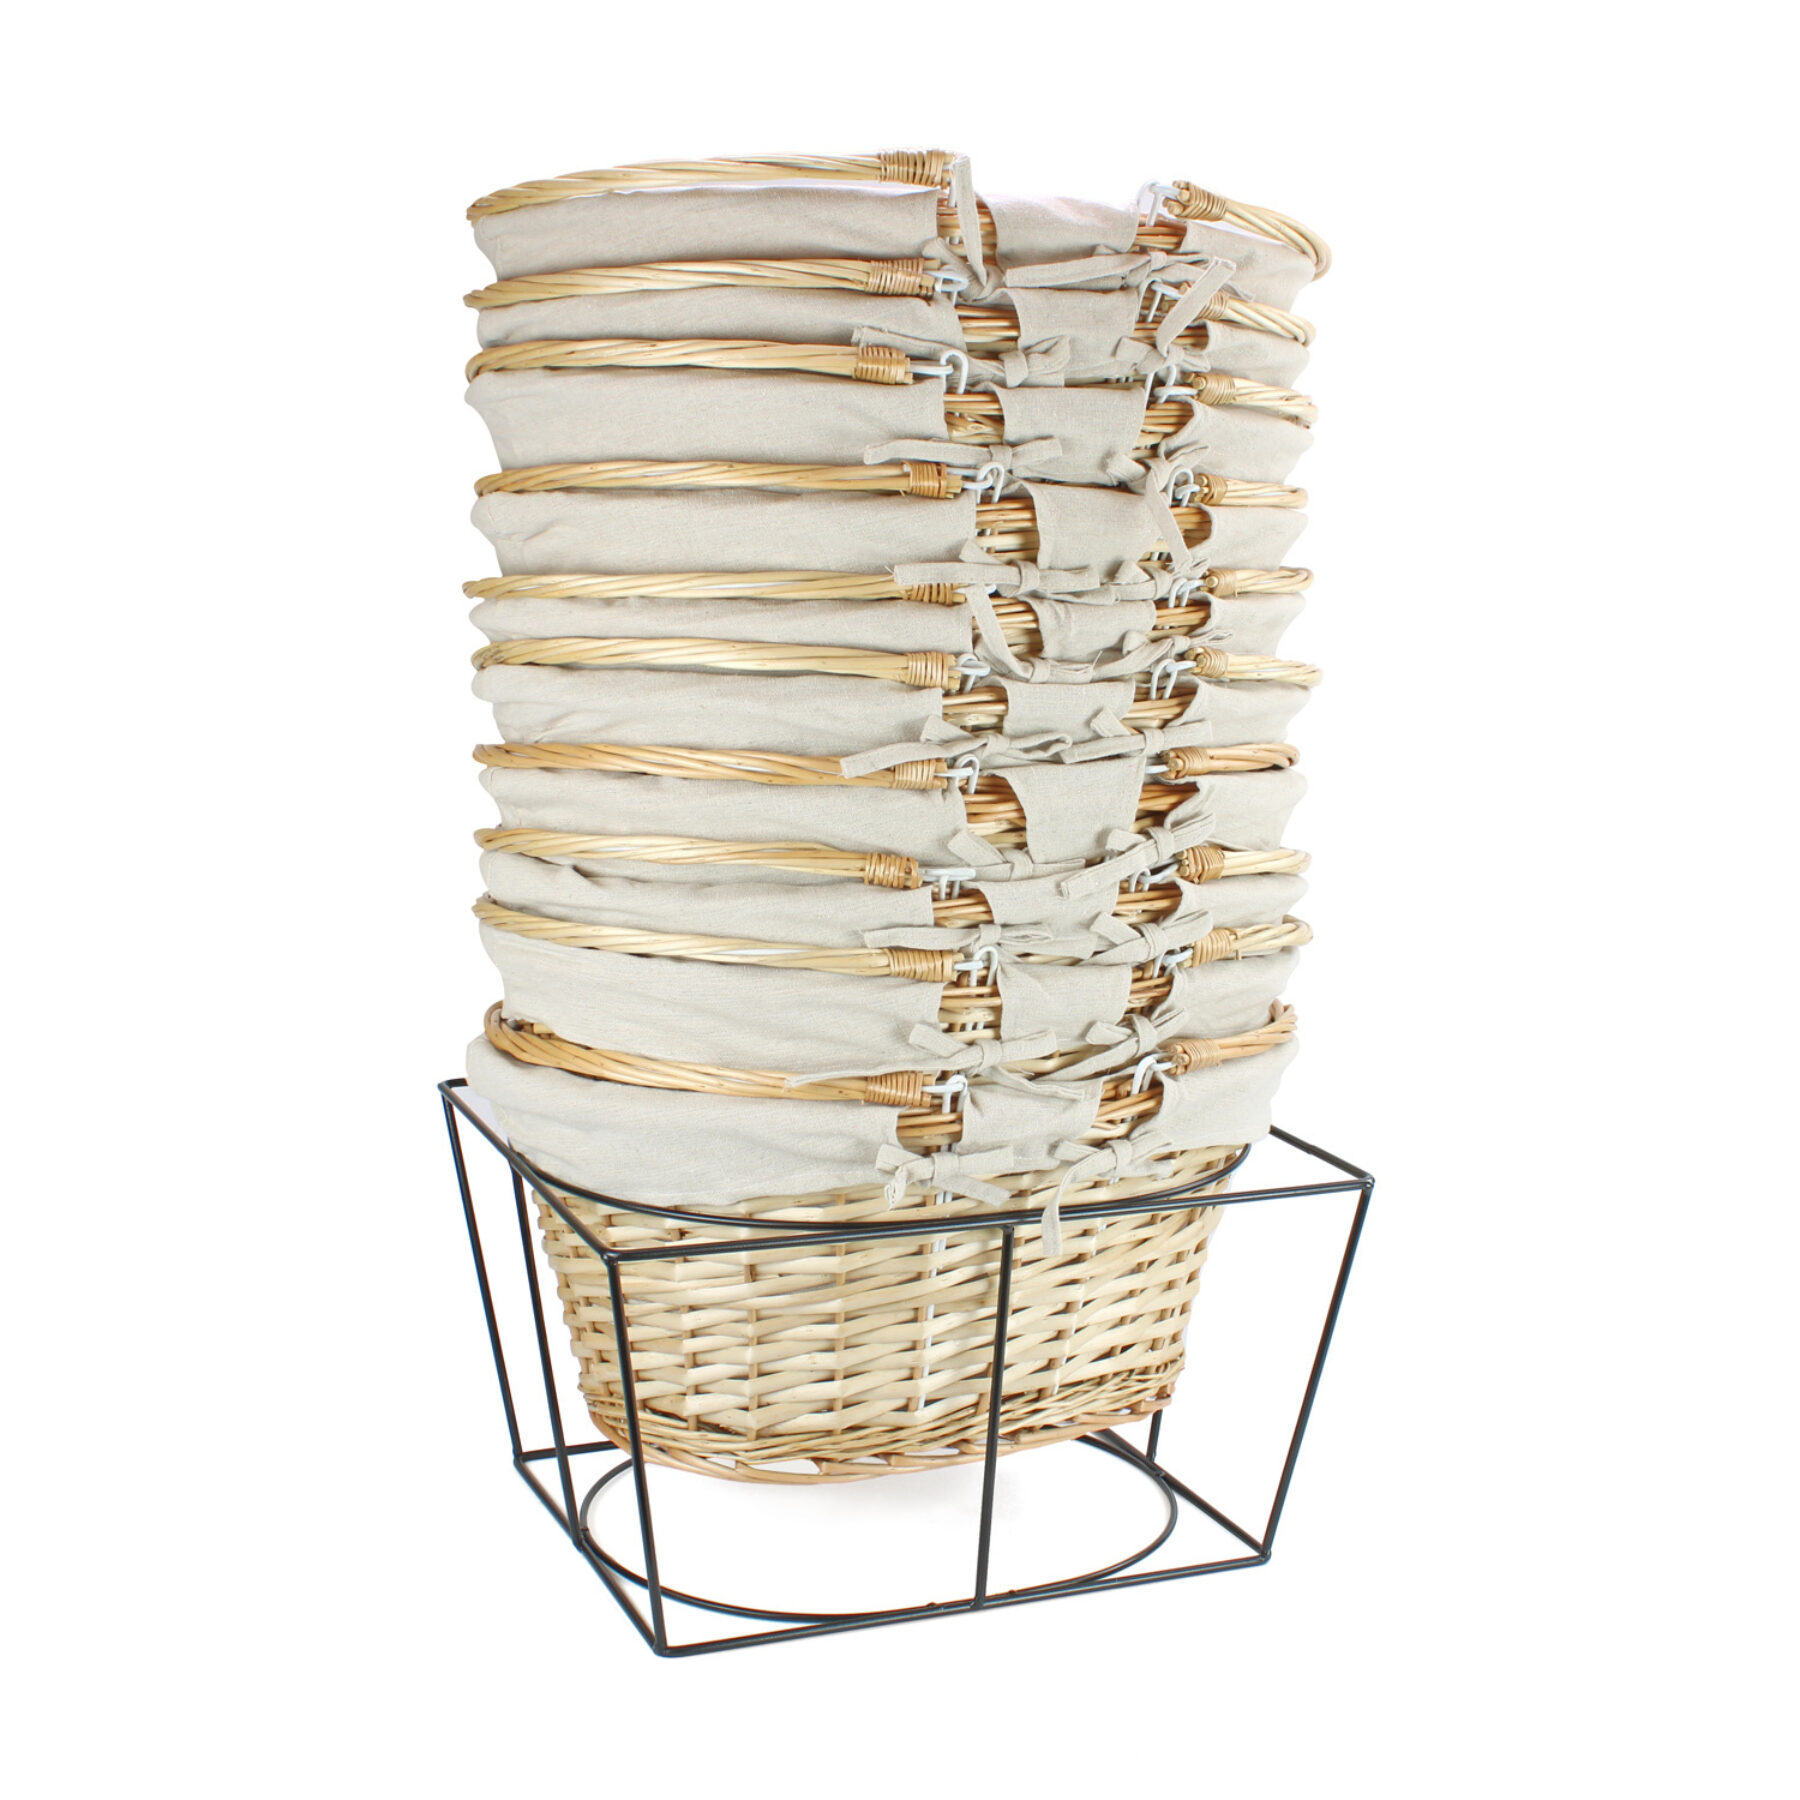 10 Large Shopping Baskets & Metal Stand - Light